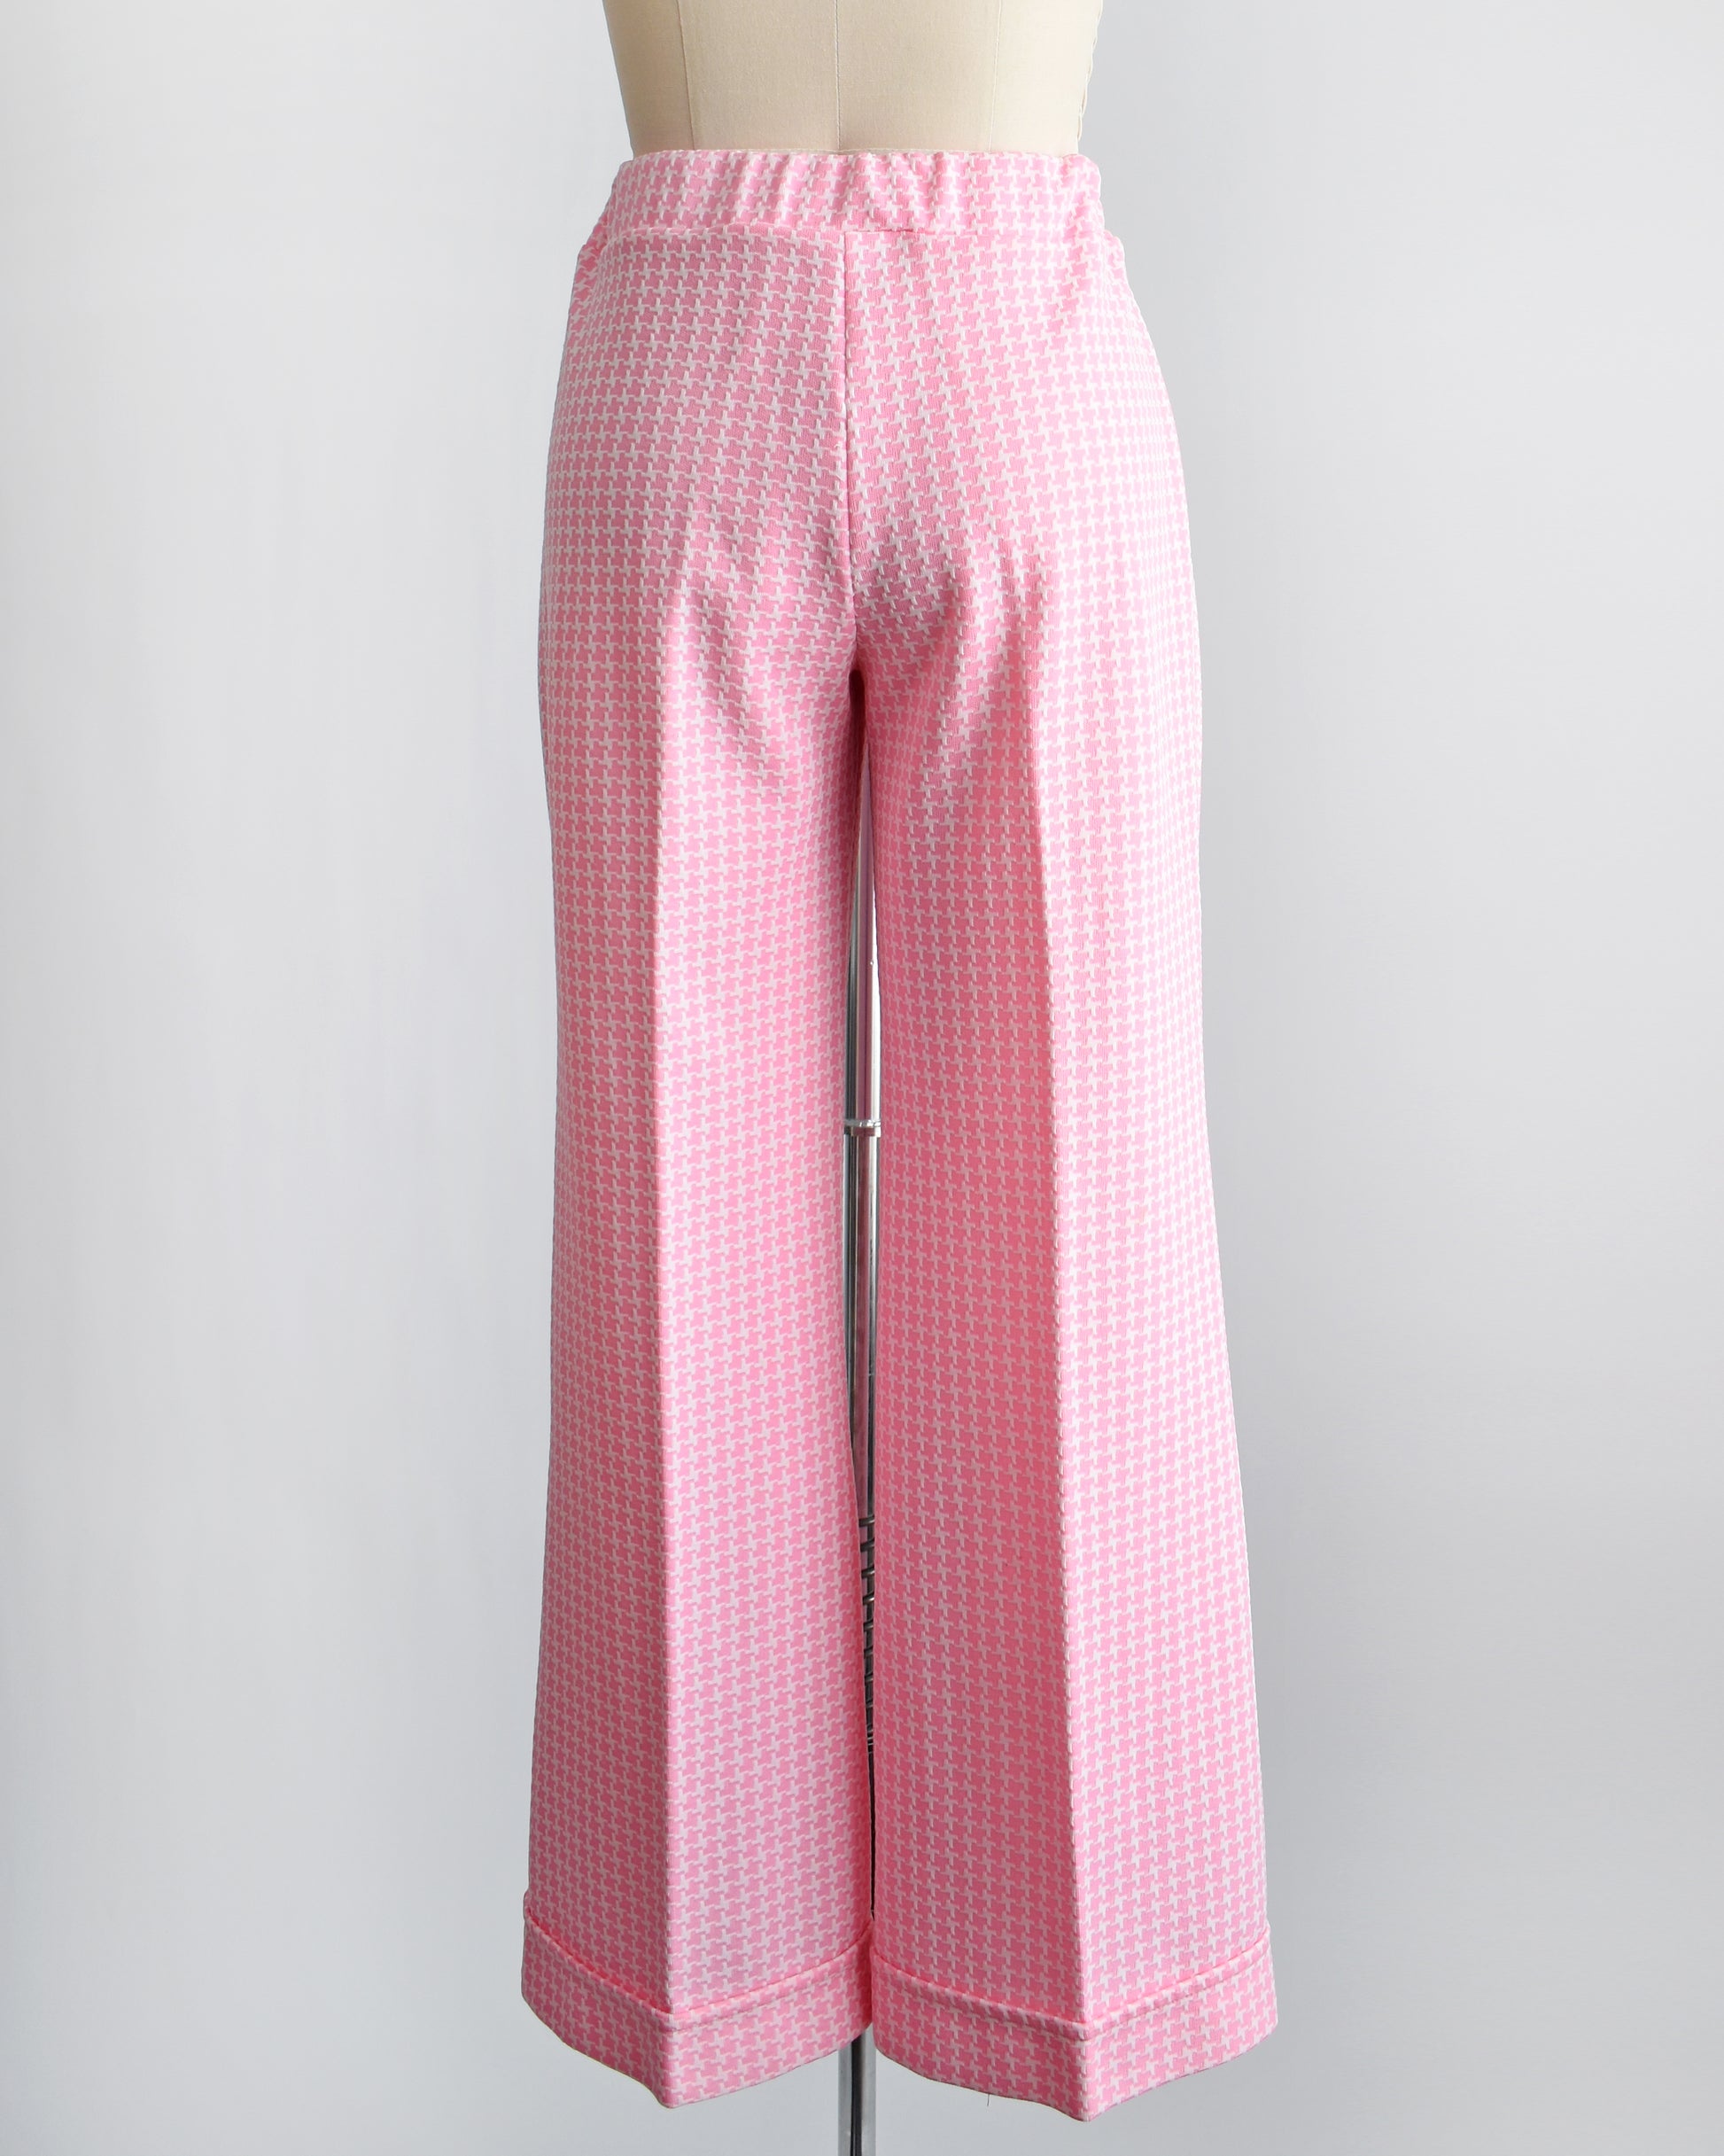 Back view of a vintage 1970s pink  and white houndstooth print wide leg pants on a dress form